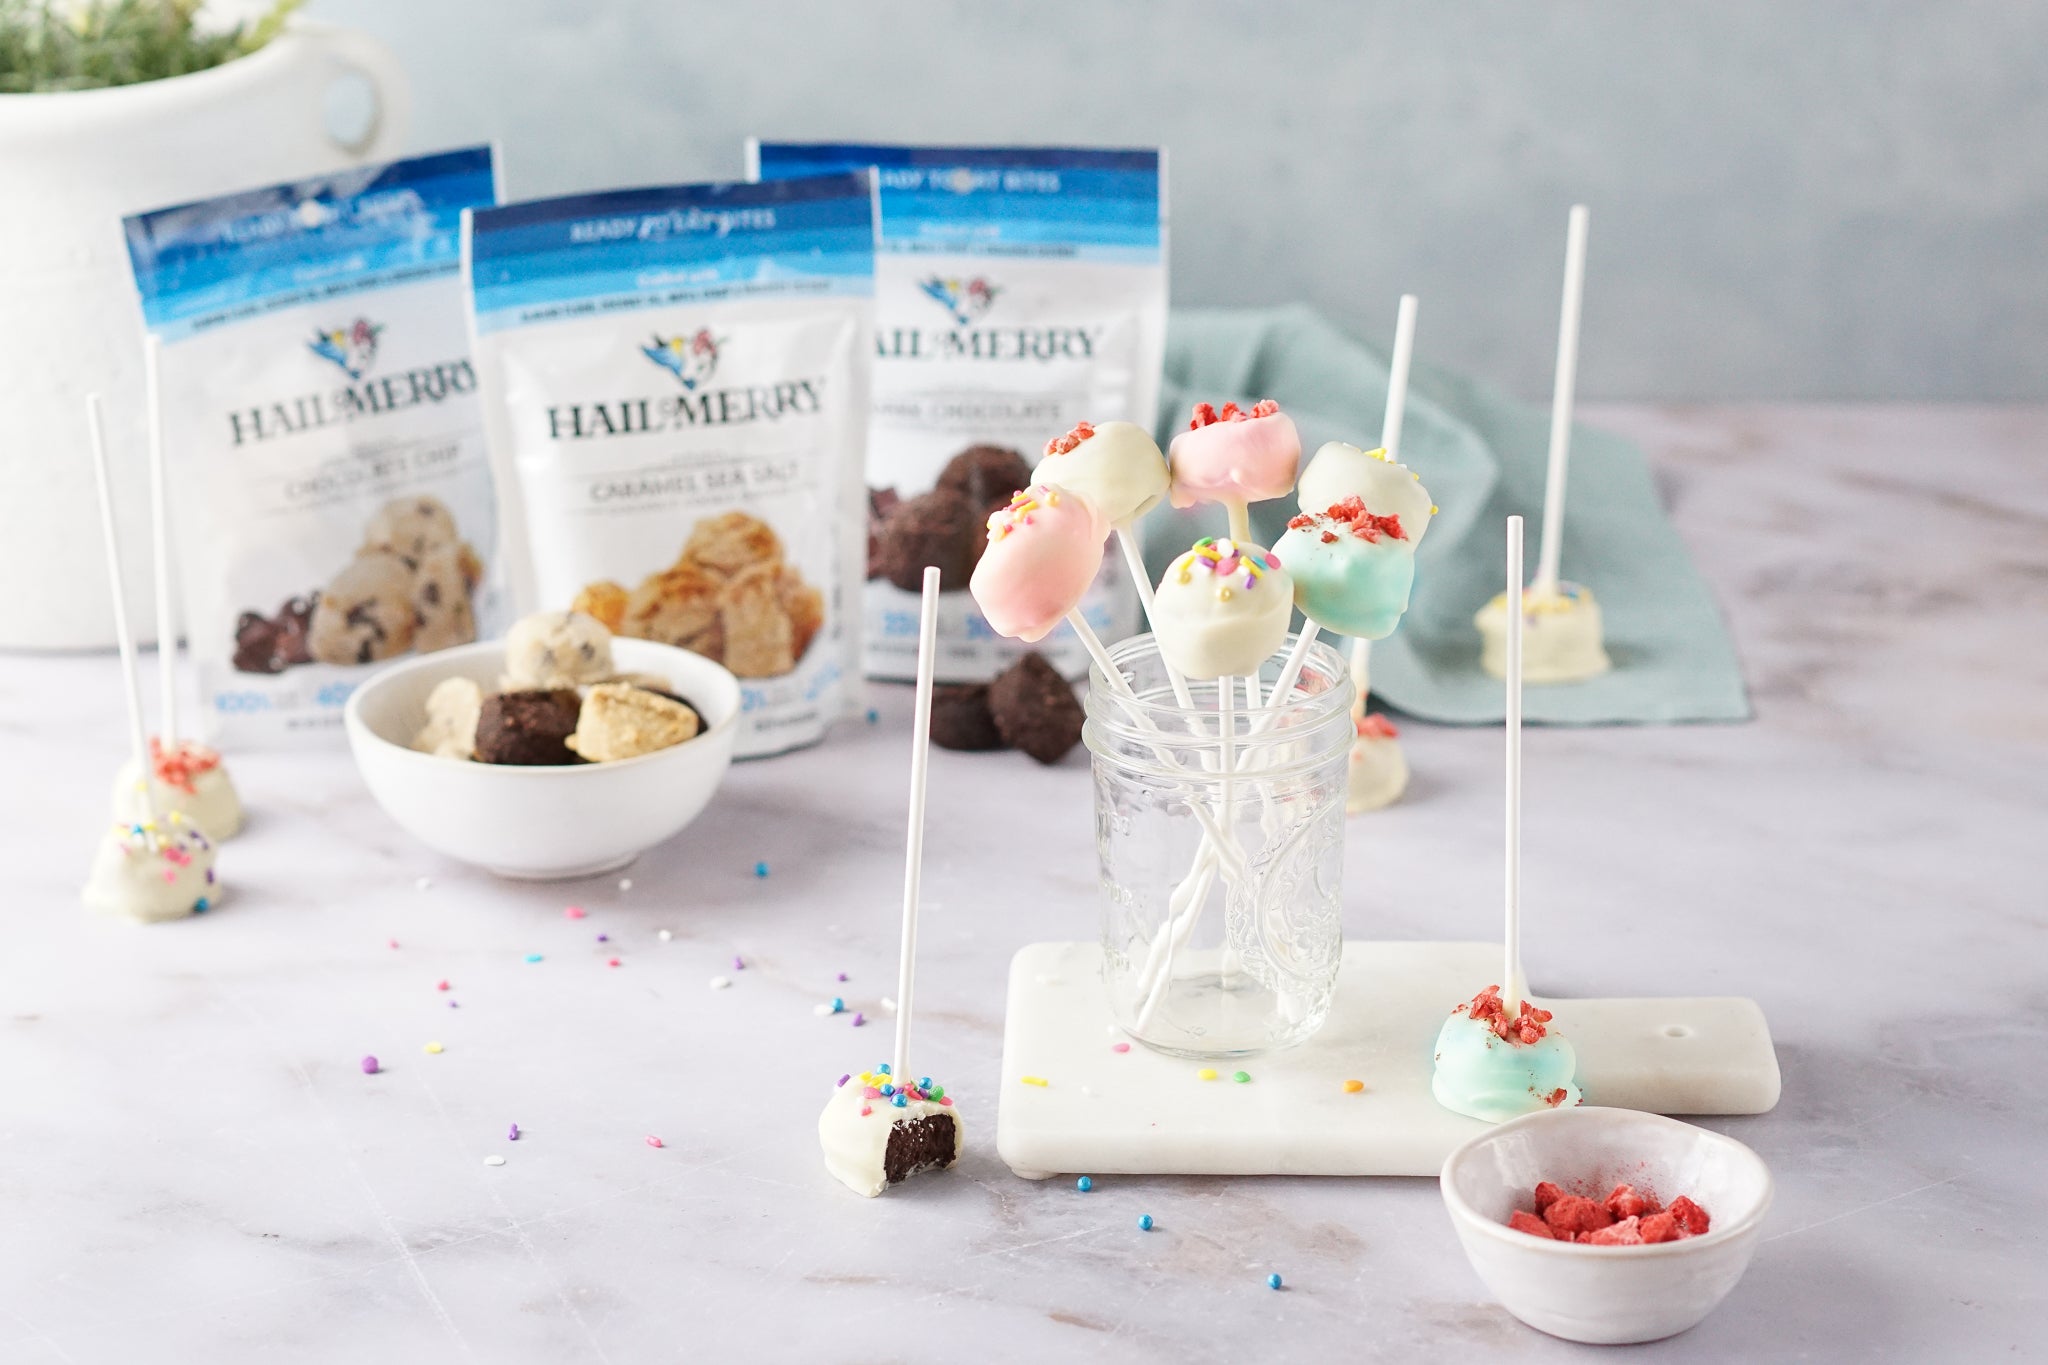 Coconut cookie dough pops dipped in vegan white chocolate topped with sprinkles and freeze-dried strawberries.  They are vegan, gluten-free and non-GMO.